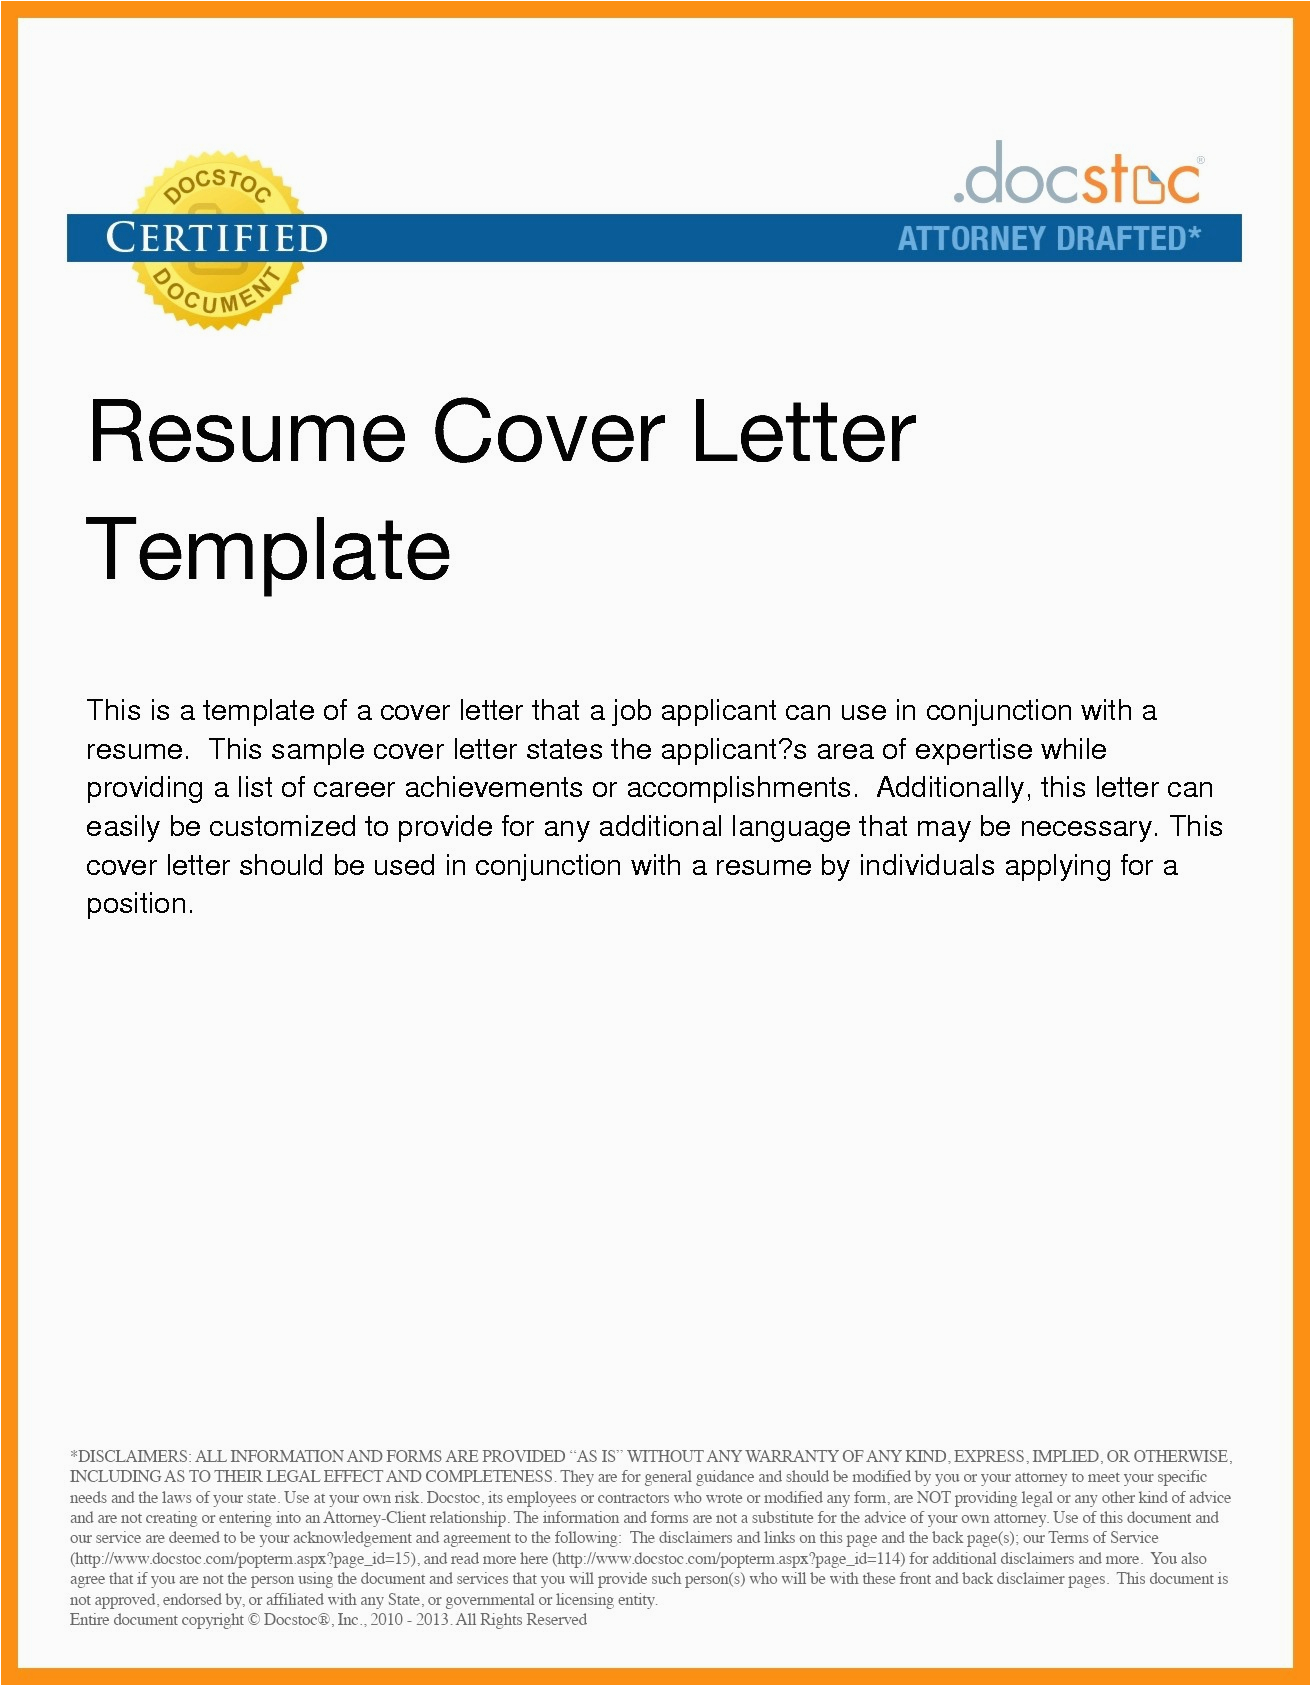 Sample Letter to Send Resume by Email Sending Resume and Cover Letter by Email Collection